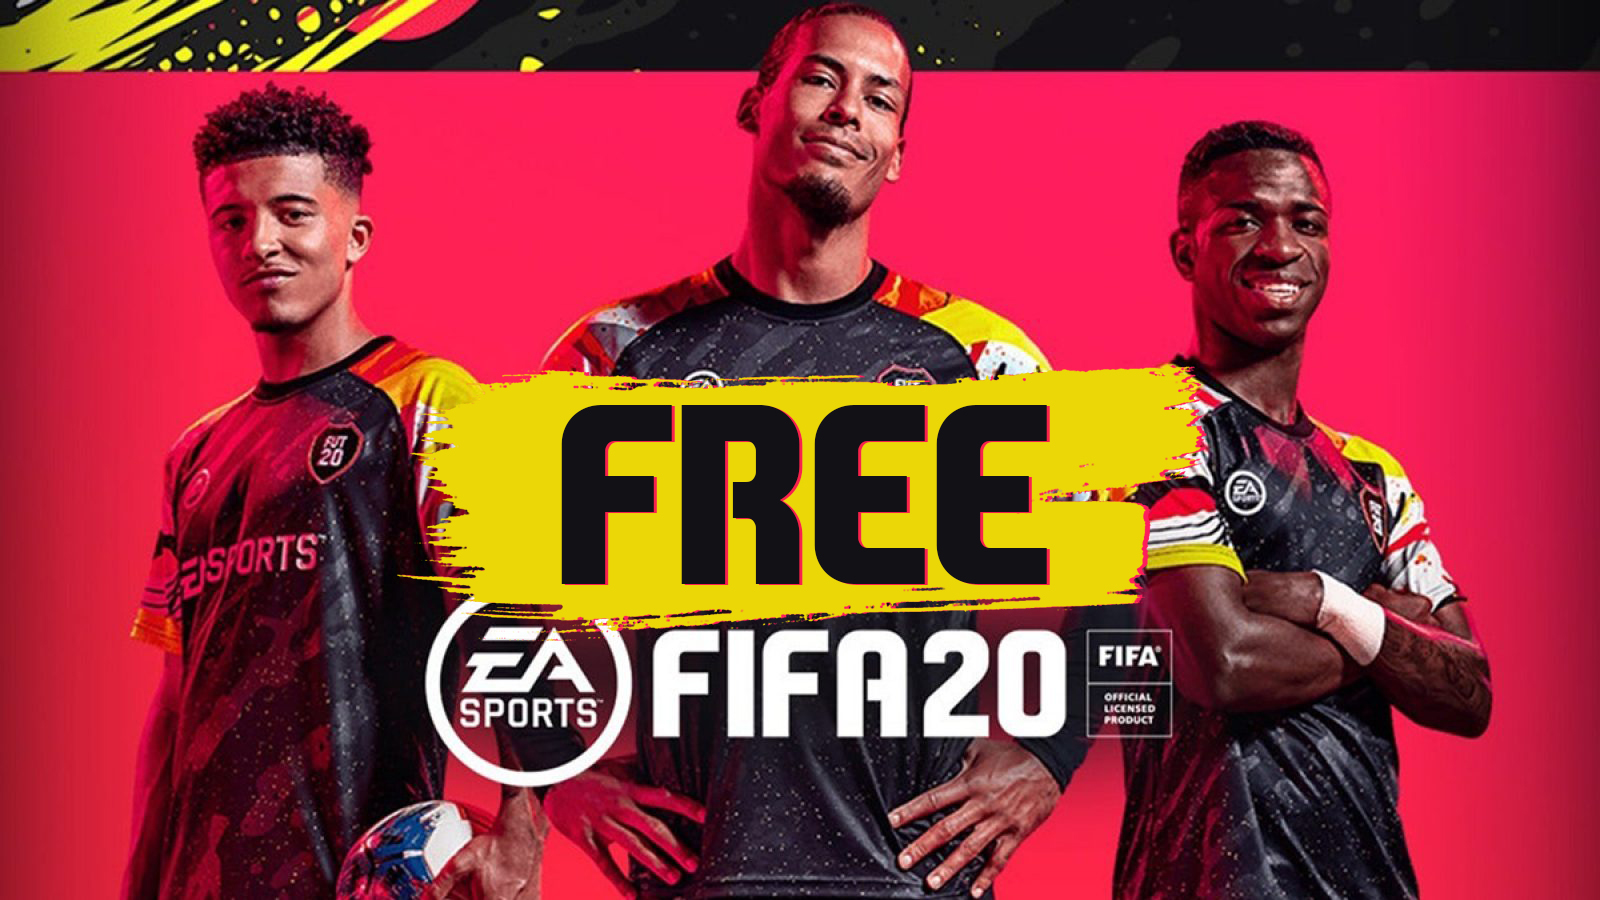 Fifa 20 Download - Download Fifa 2020 Mod Fifa 14 Apk Obb Data Offline : Football is back on the virtual streets.